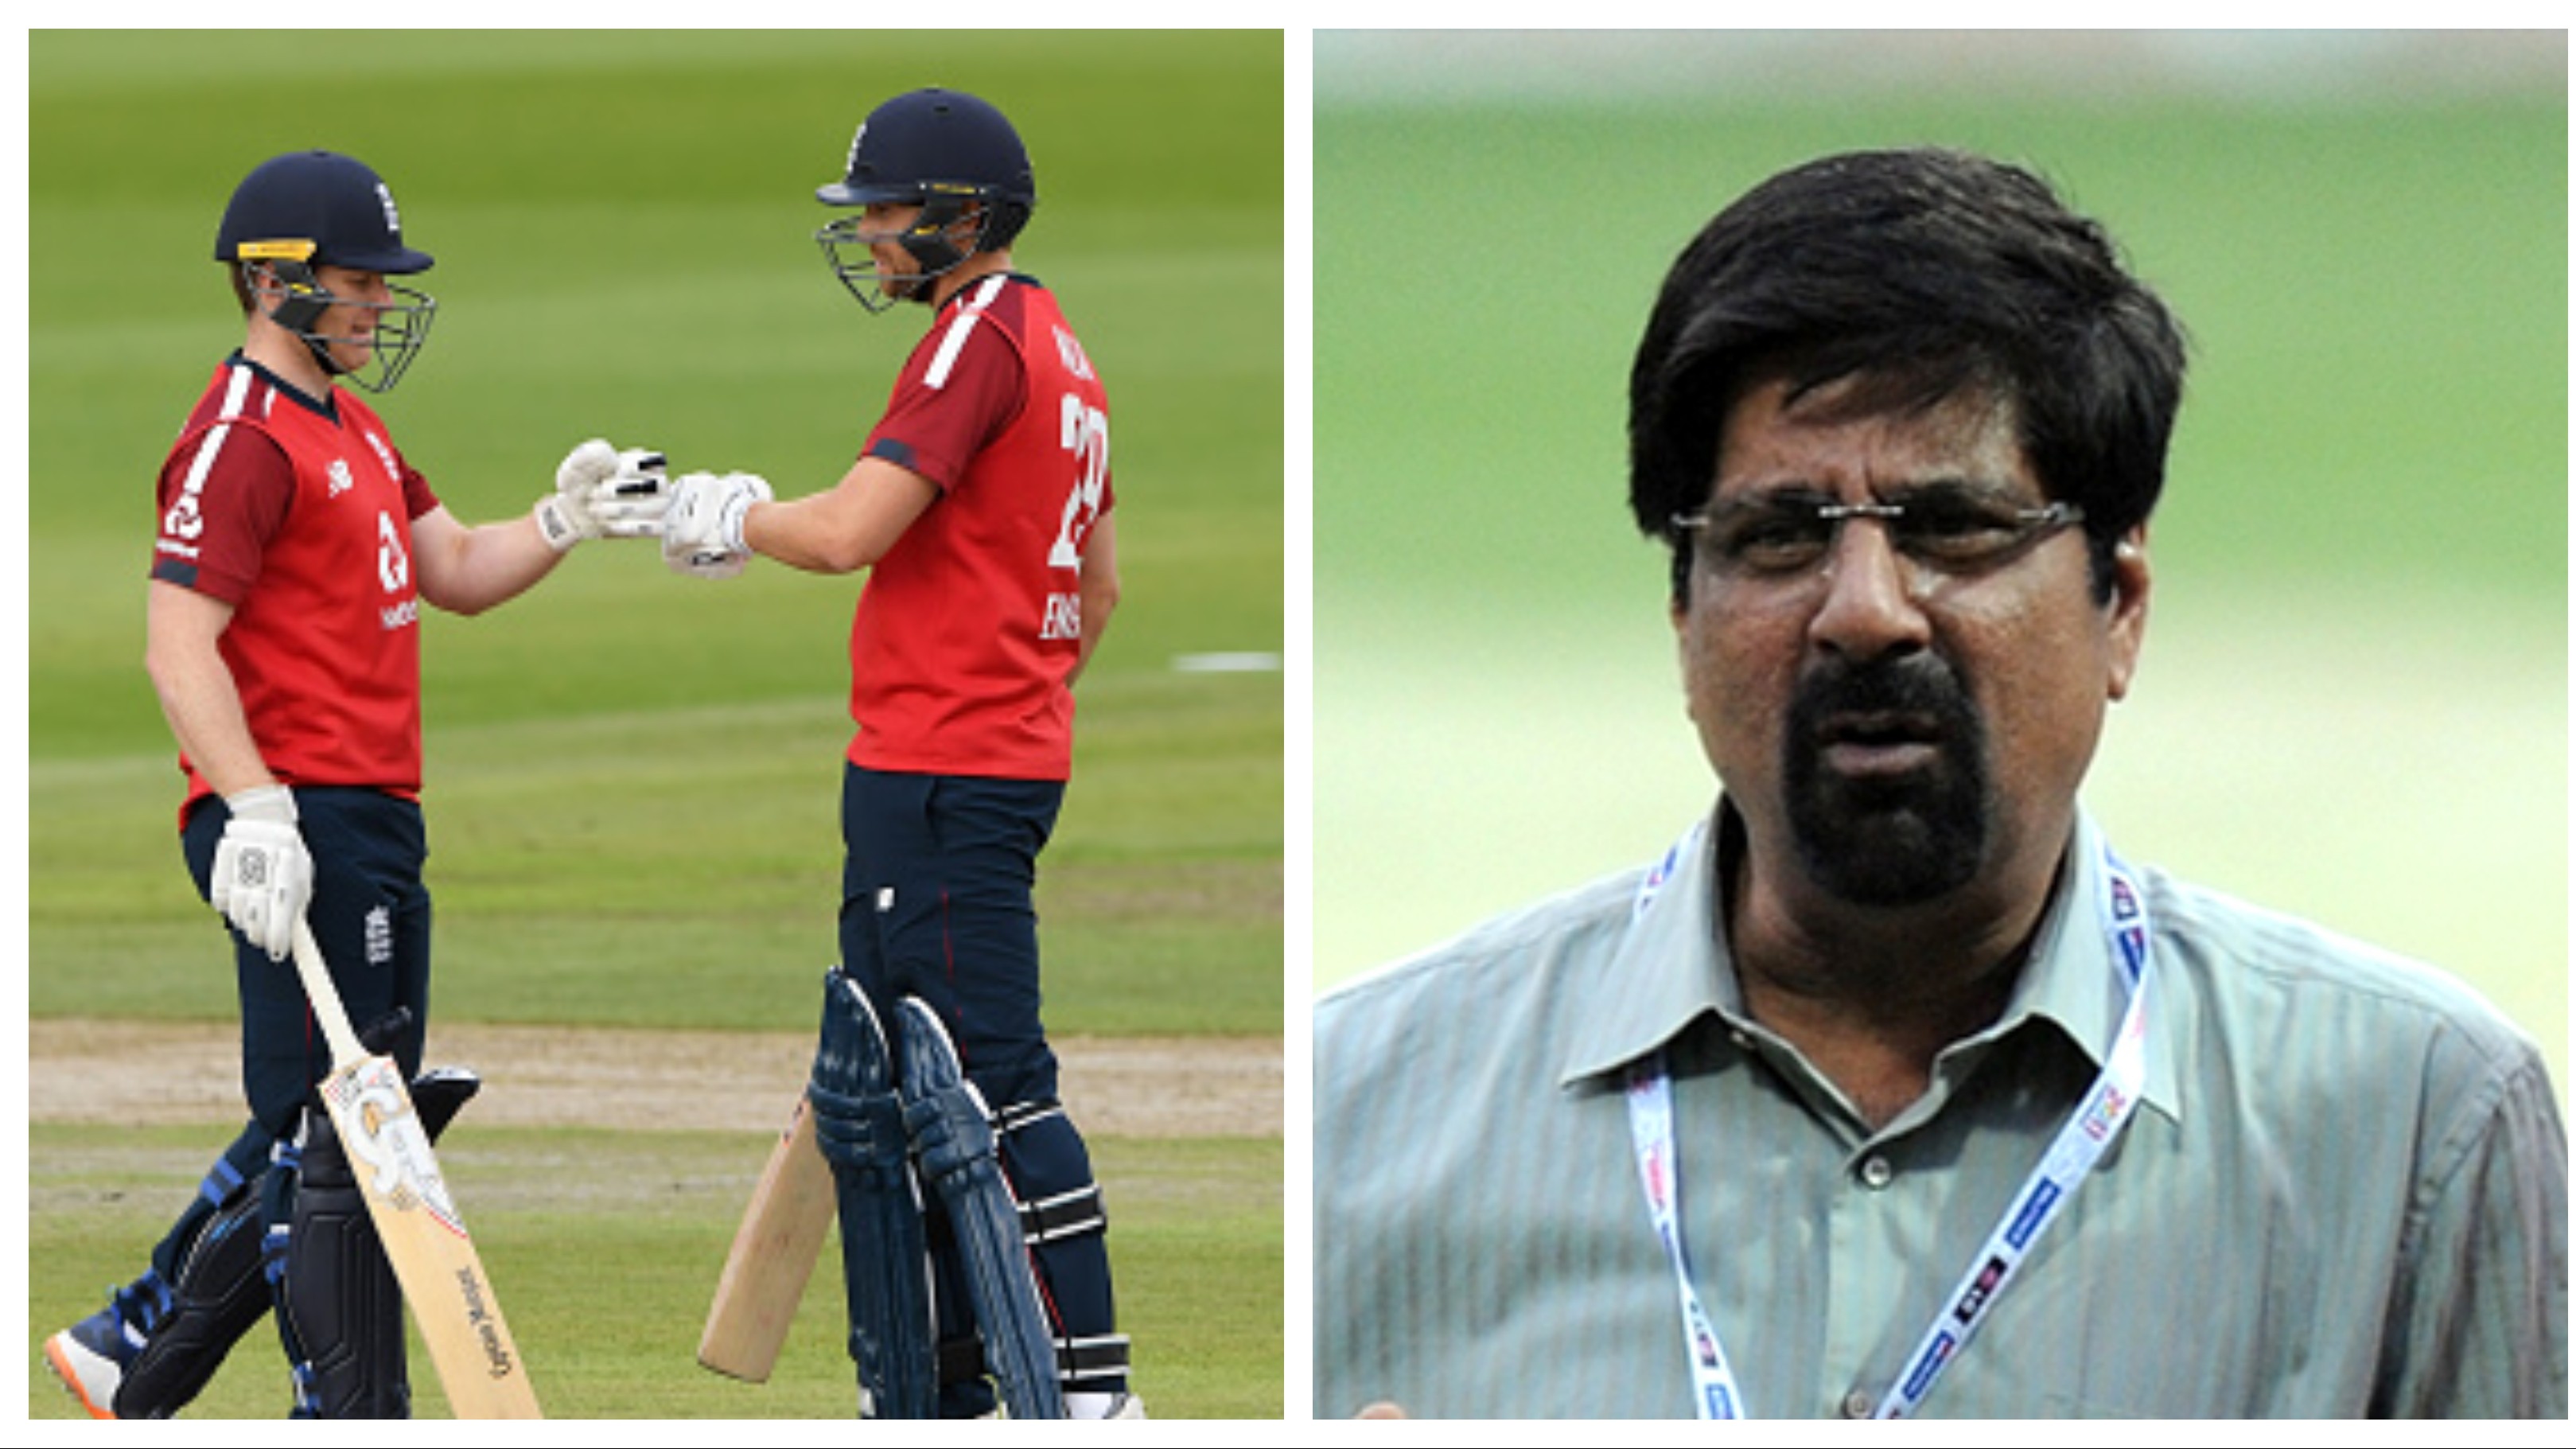 ENG v PAK 2020: Kris Srikkanth calls for fairer balance between bat and ball after England's mighty chase 